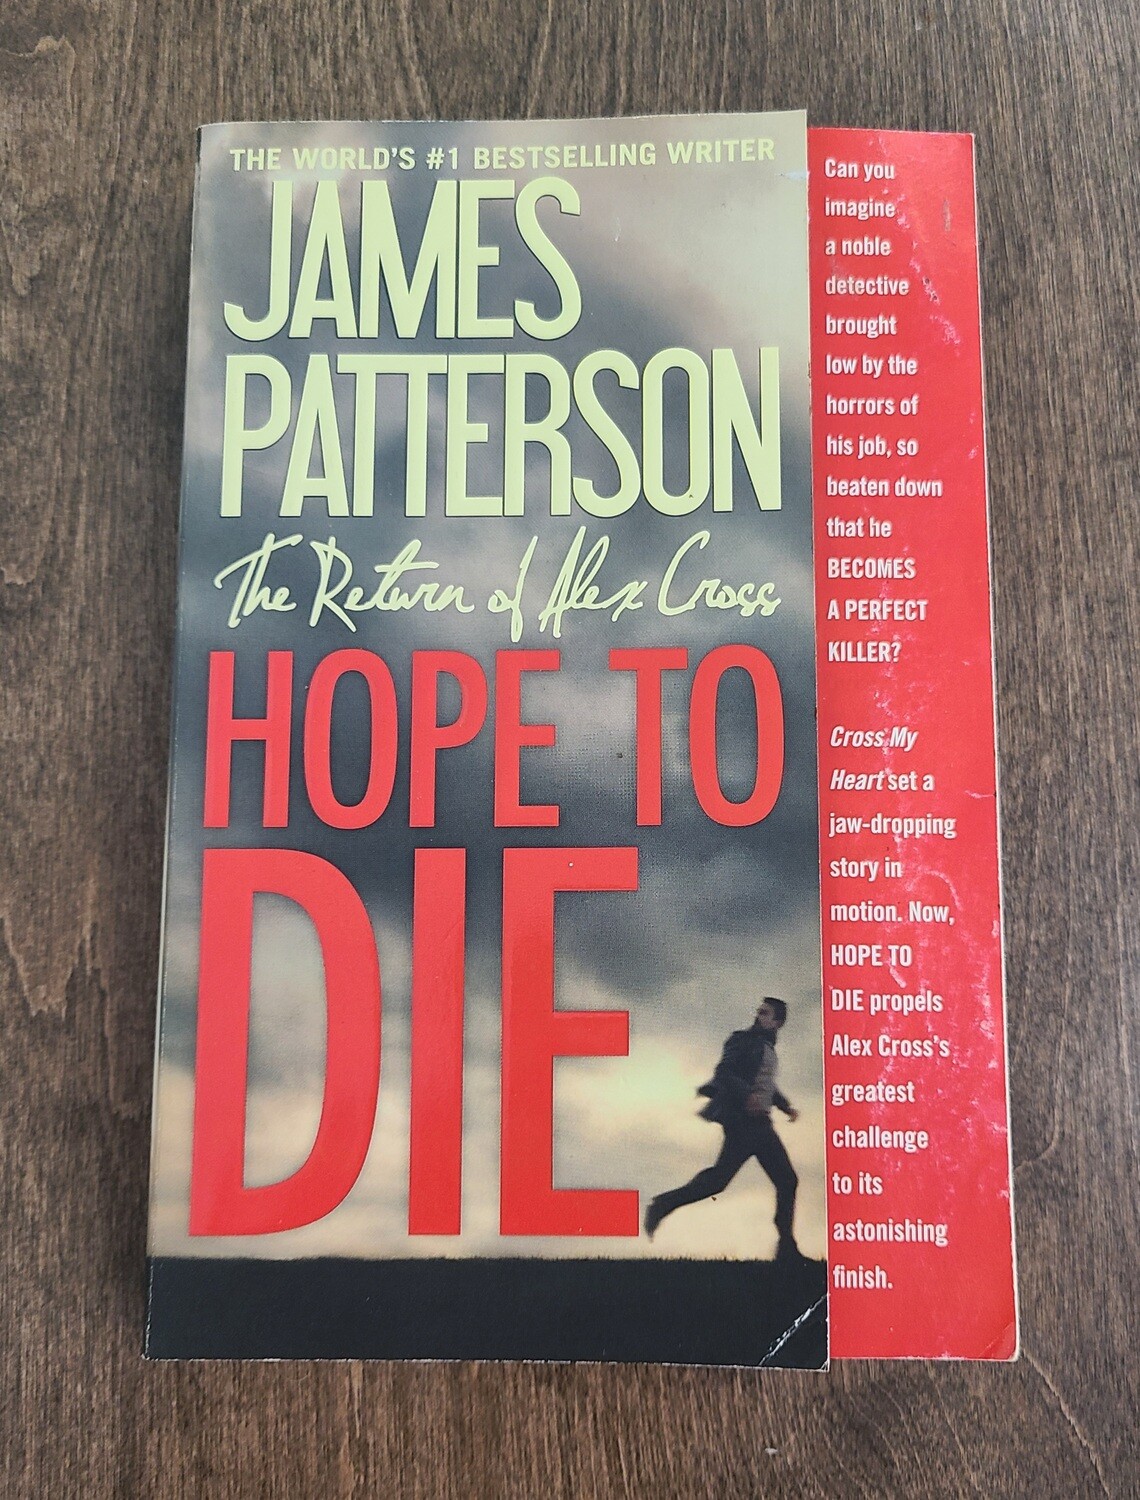 Hope to Die by James Patterson